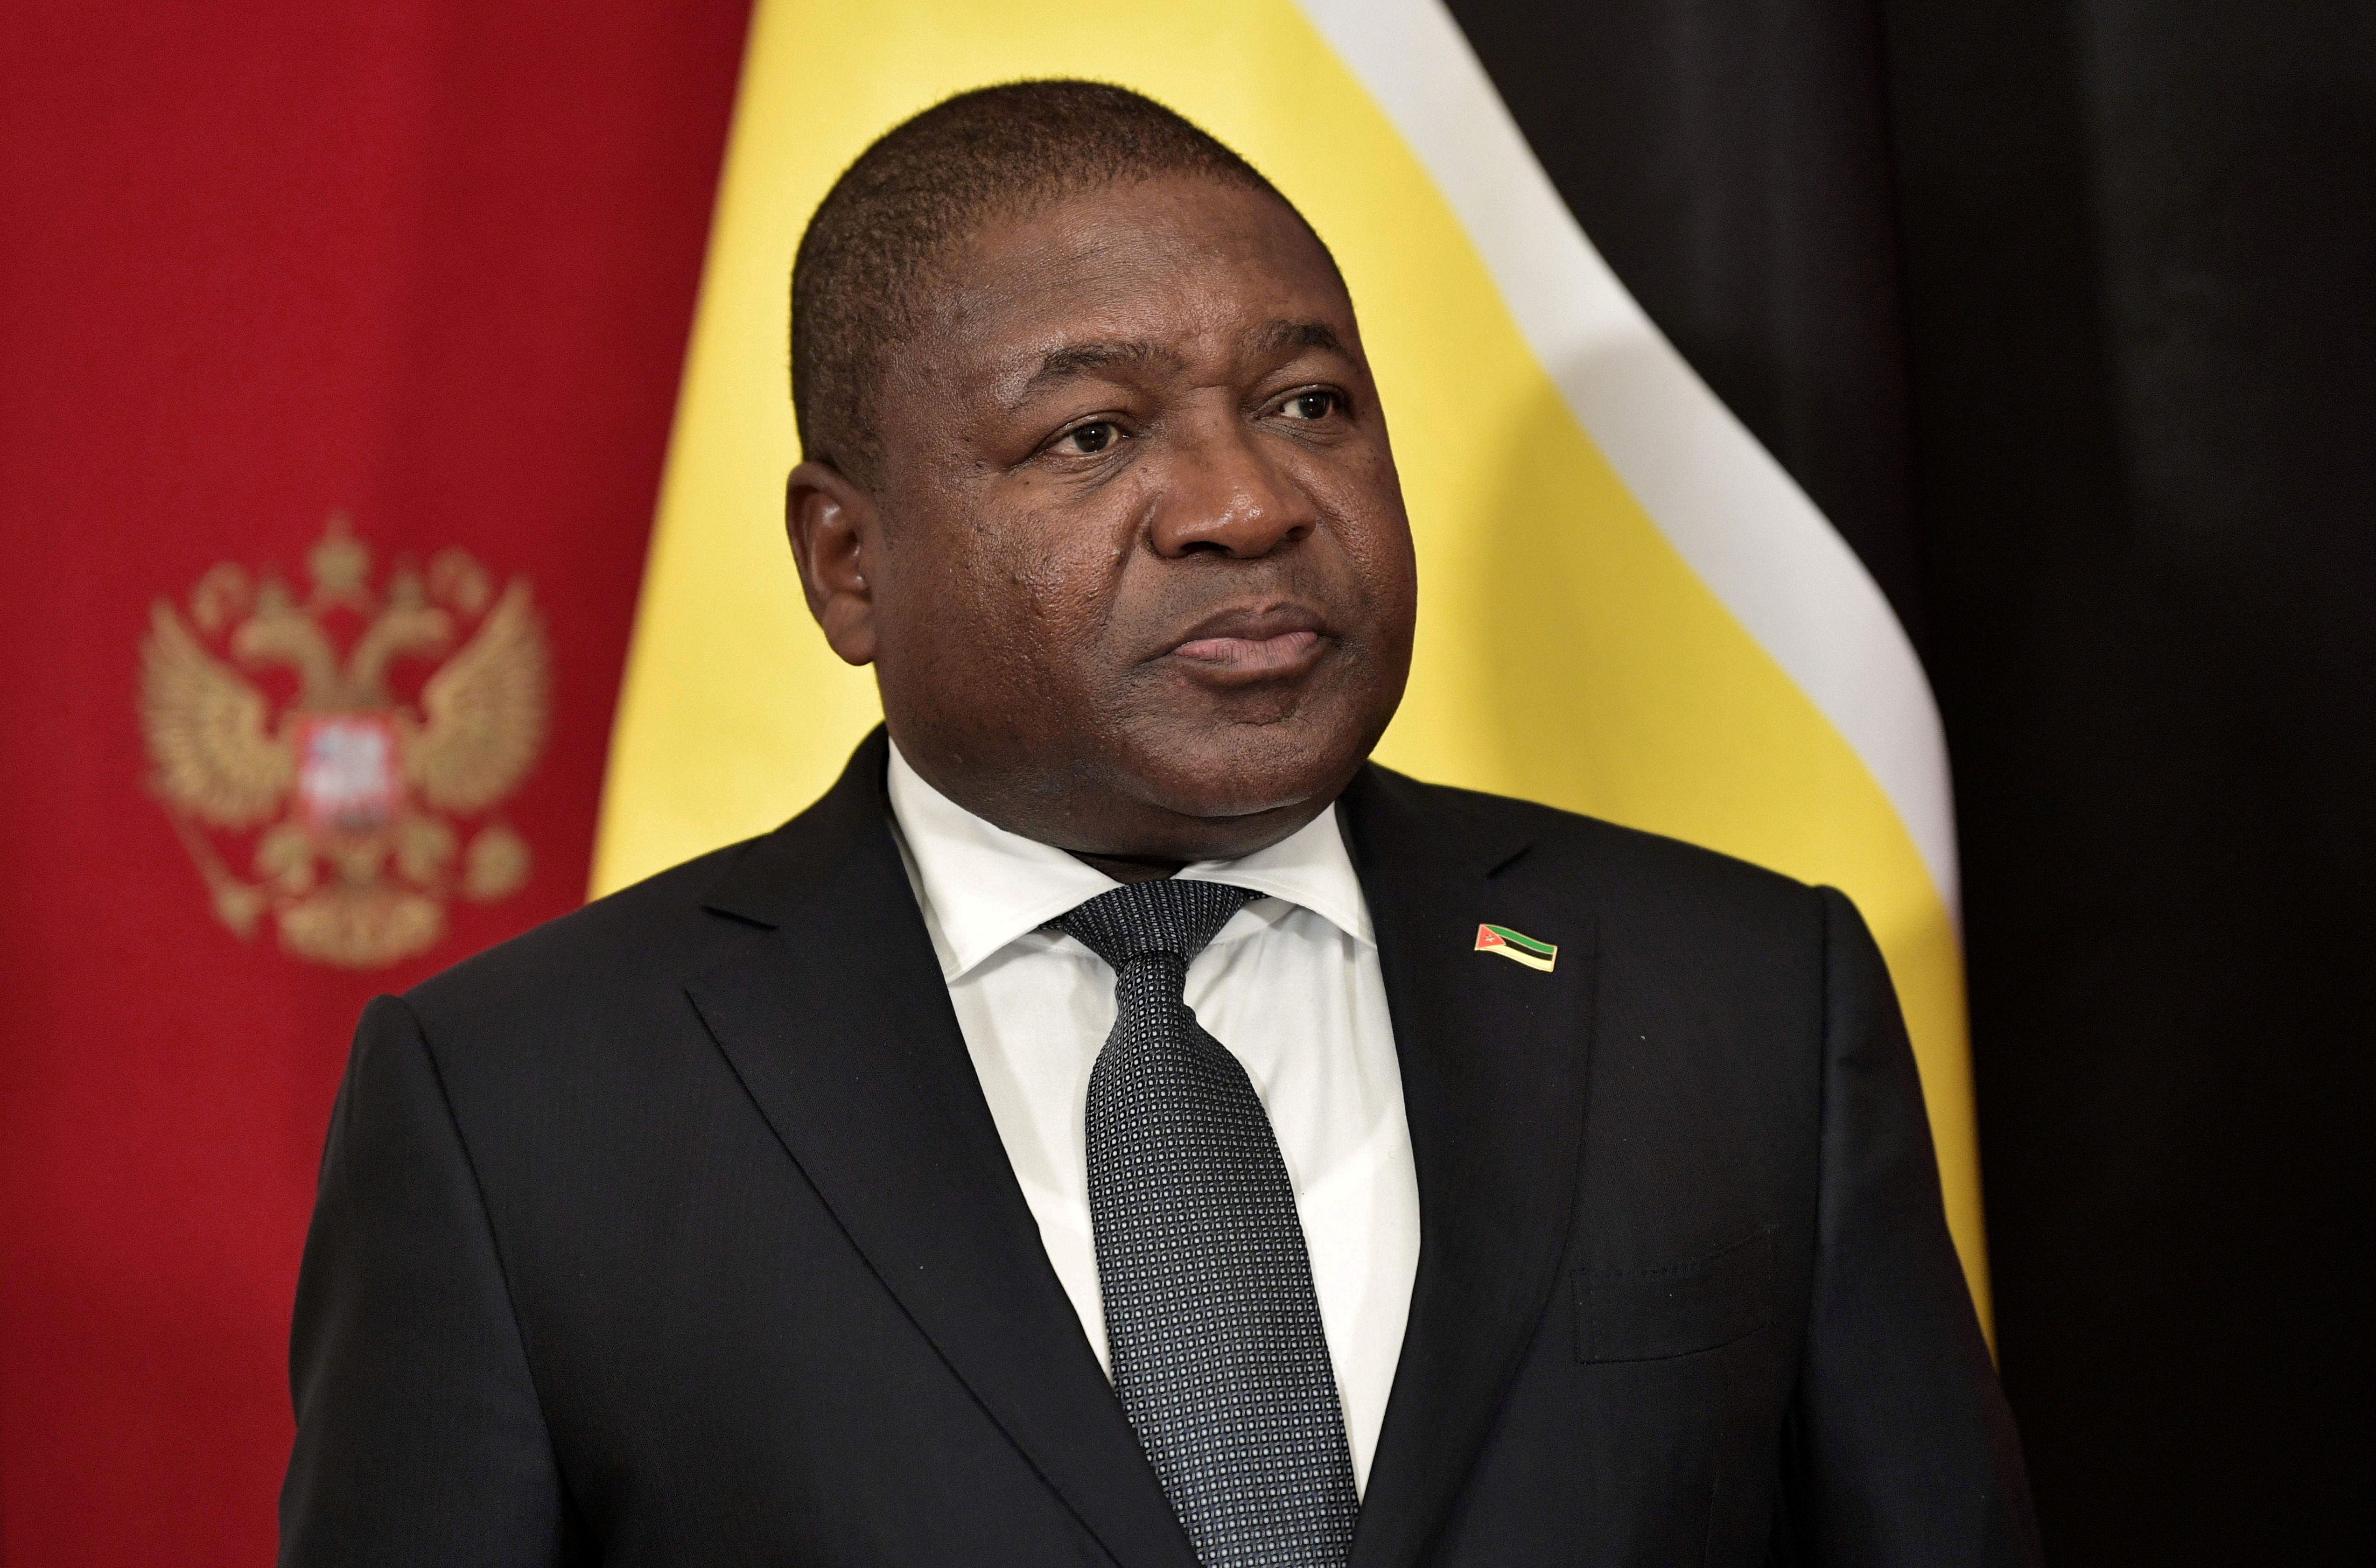 Mozambique's President Nyusi attends a signing ceremony in Moscow